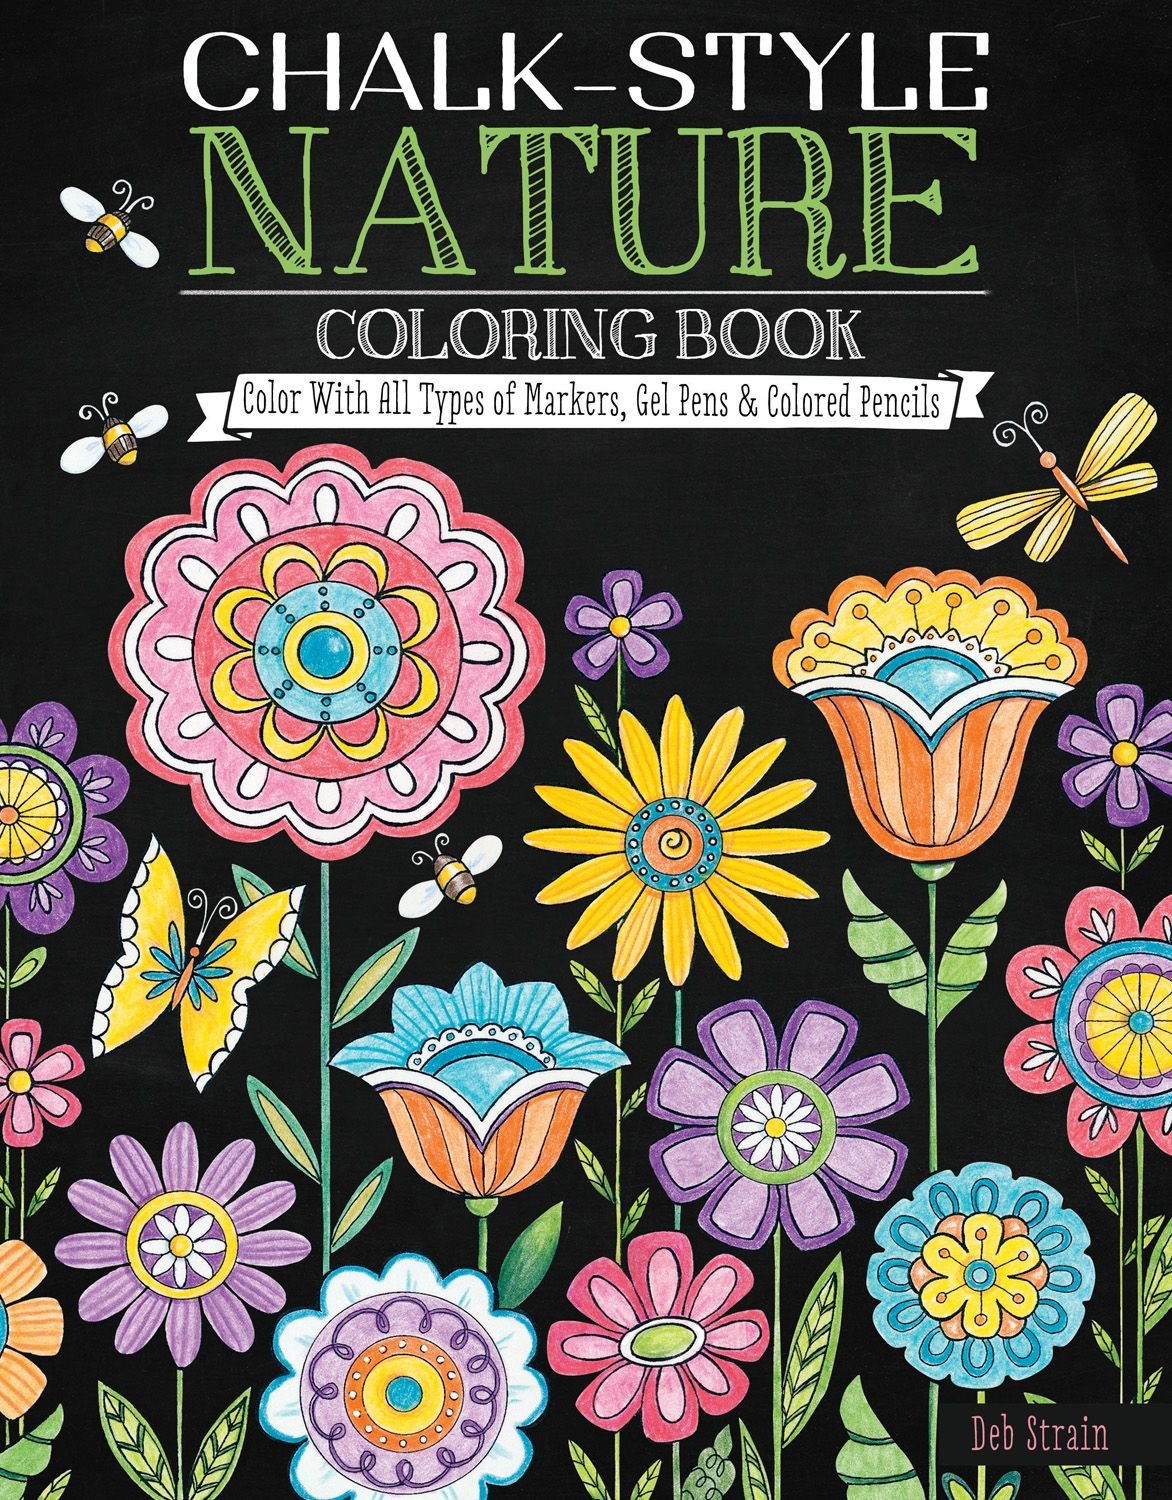 Chalkboard style adult coloring book - Chalk-Style Botanicals Deluxe  Coloring Book - Color with markers, colored pencils or gel pens